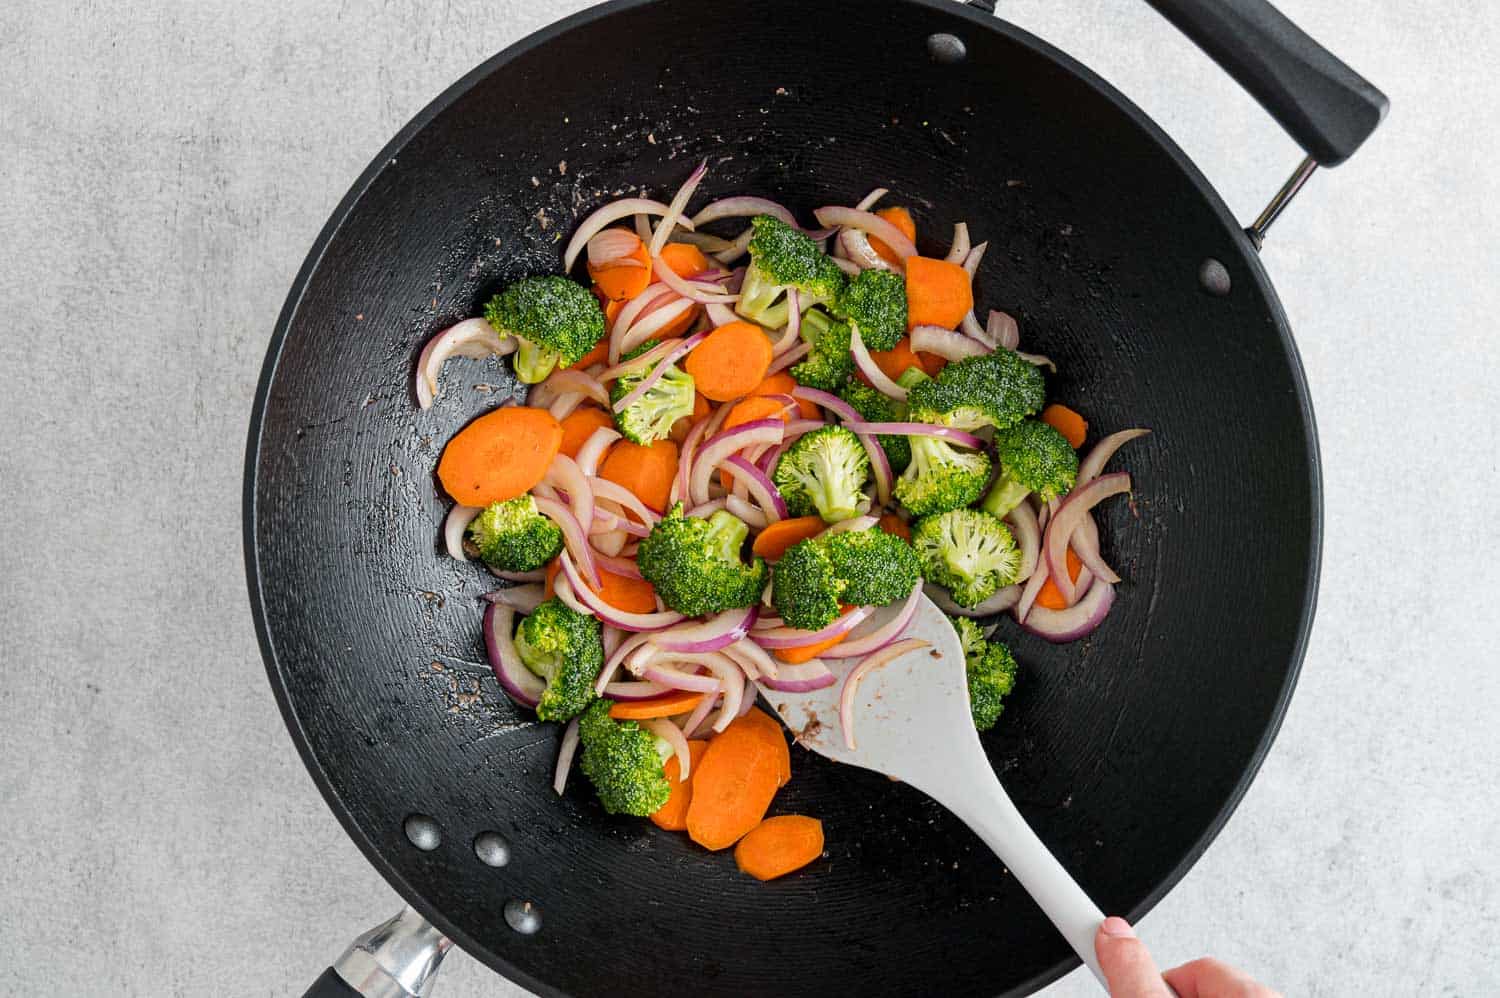 Broccoli in pan with carrots and onions.